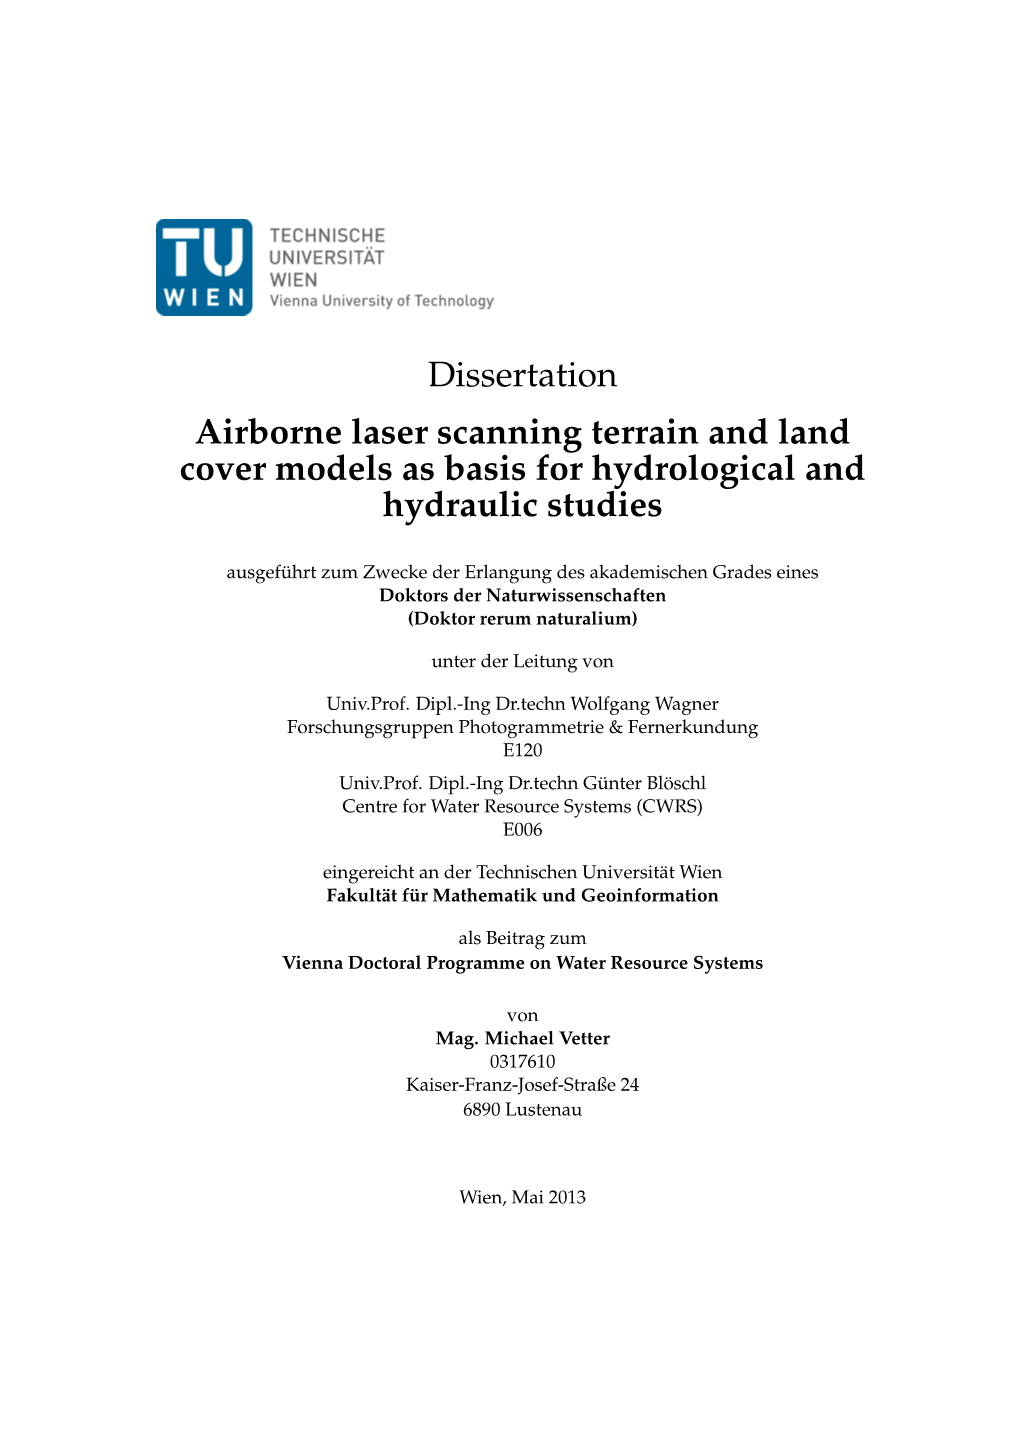 Dissertation Airborne Laser Scanning Terrain and Land Cover Models As Basis for Hydrological and Hydraulic Studies